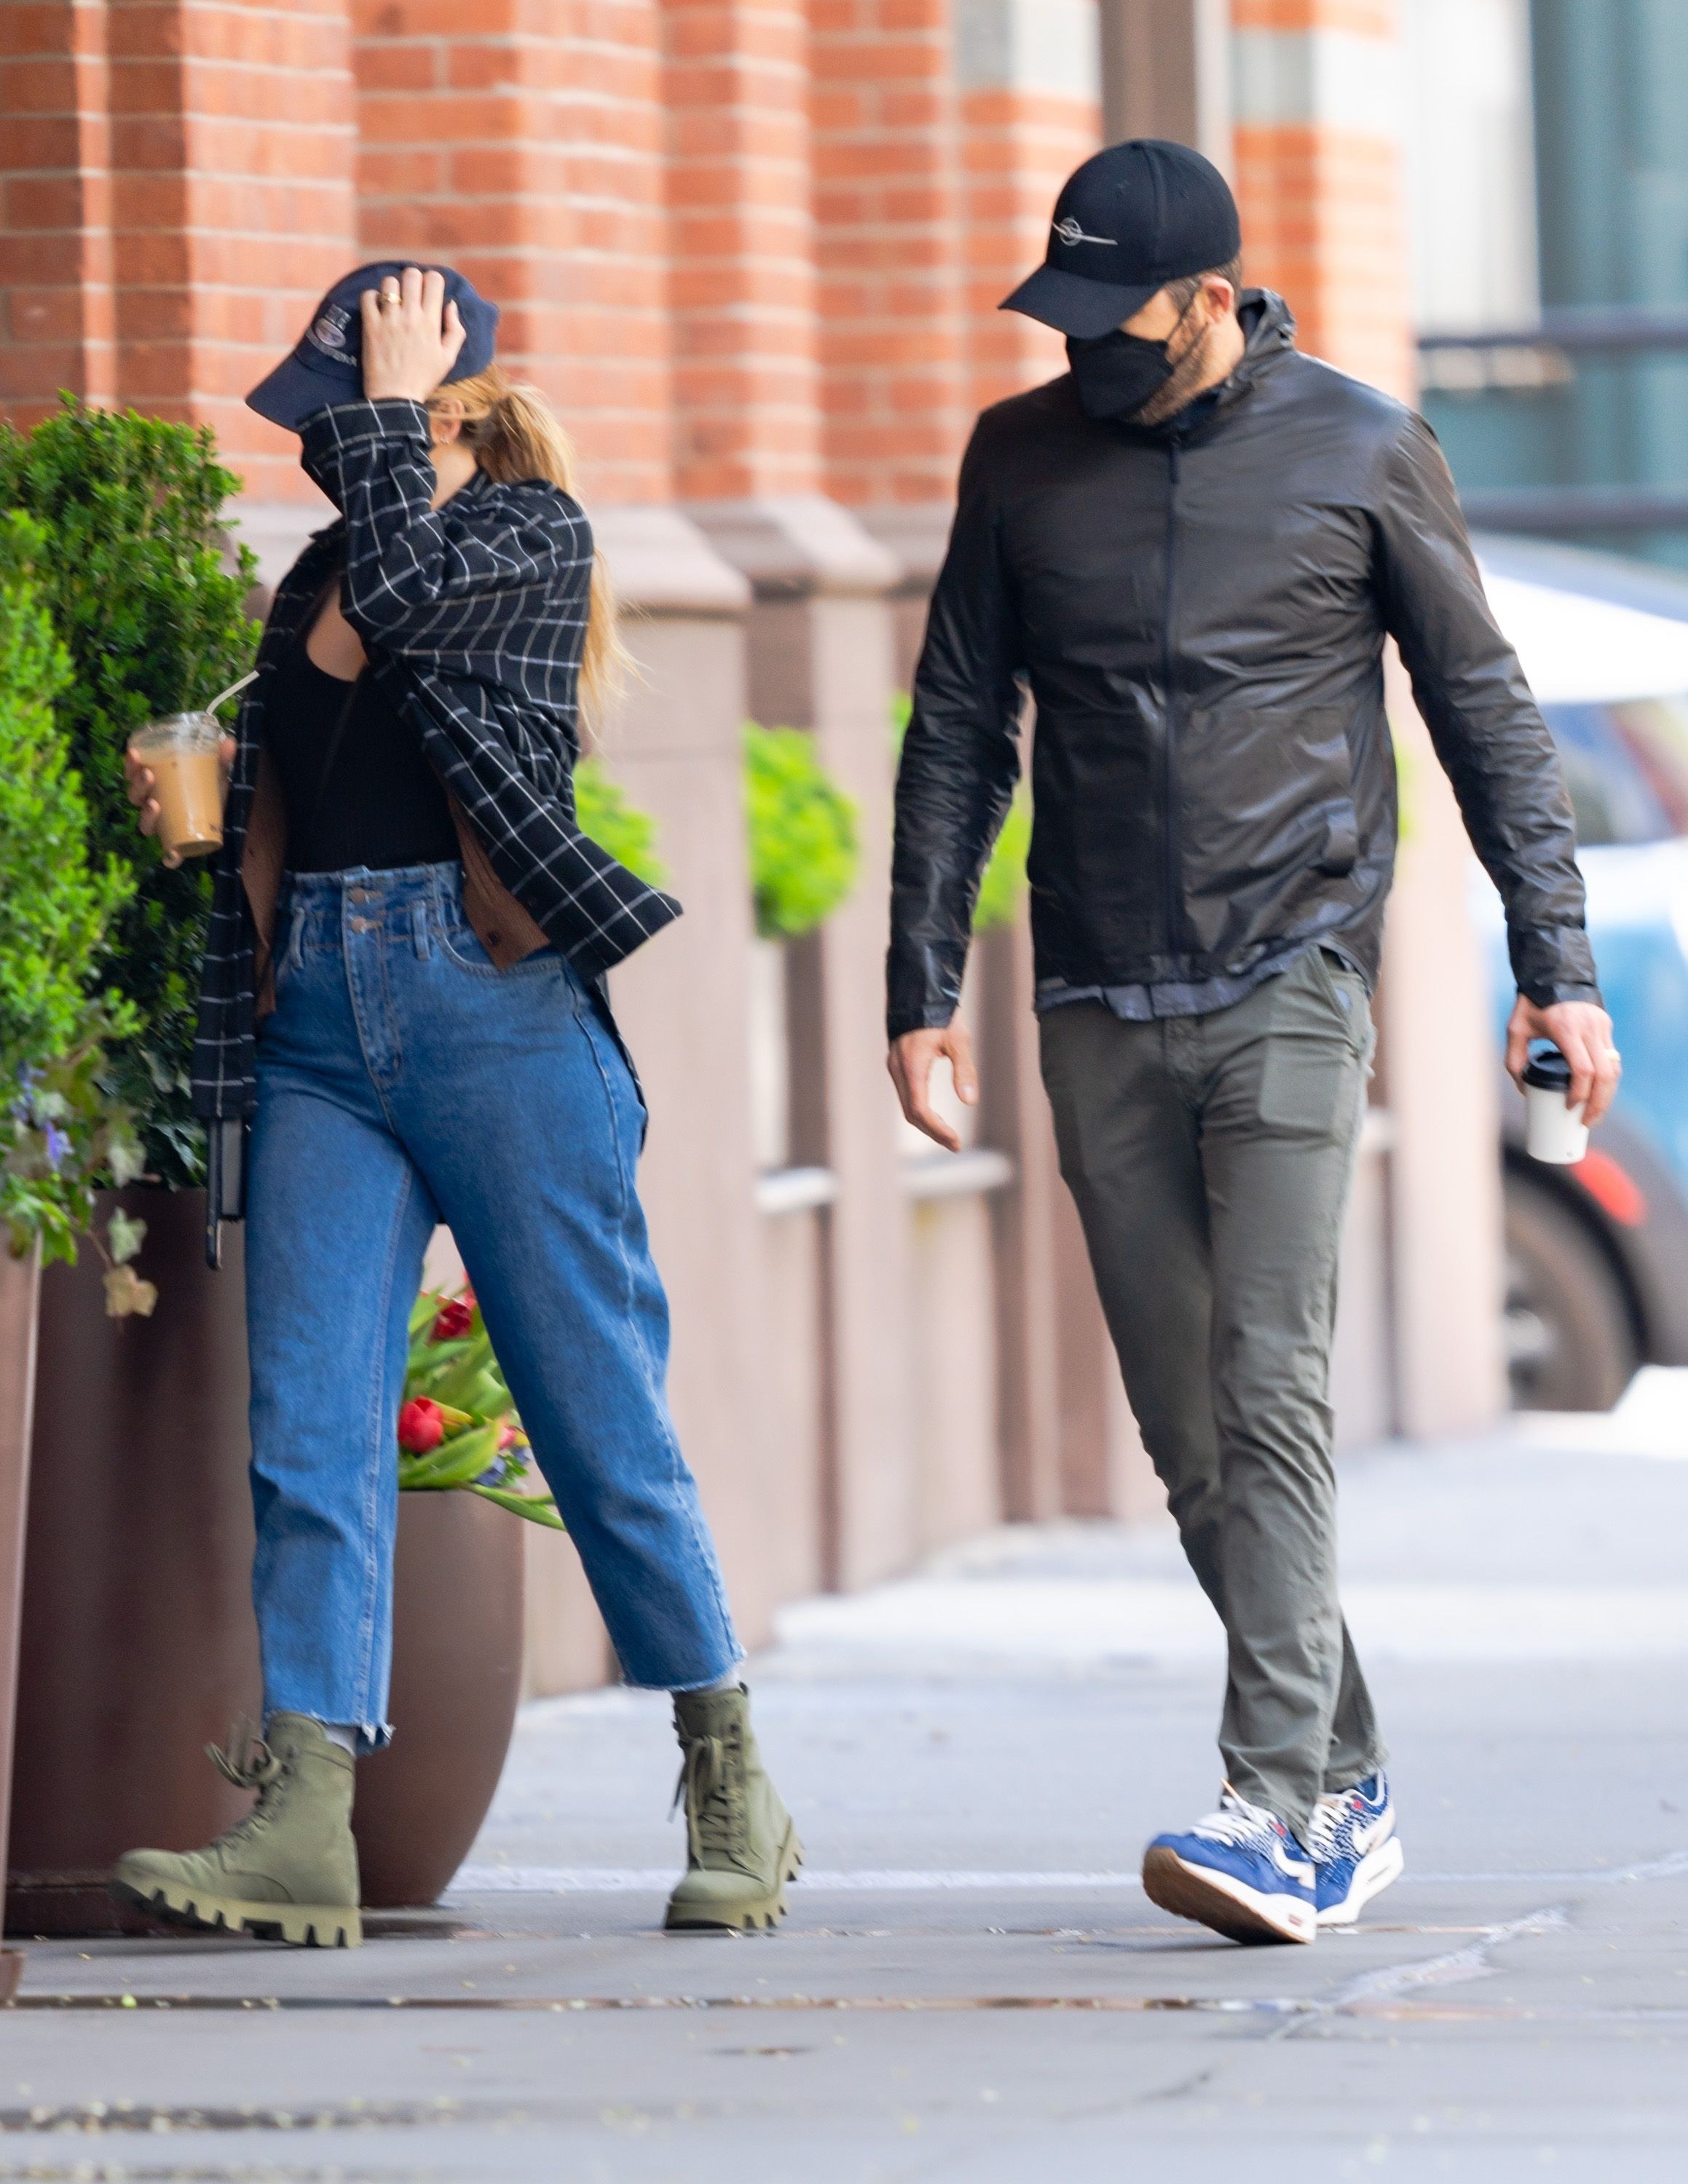 Blake Lively and Ryan Reynolds walking on the street together